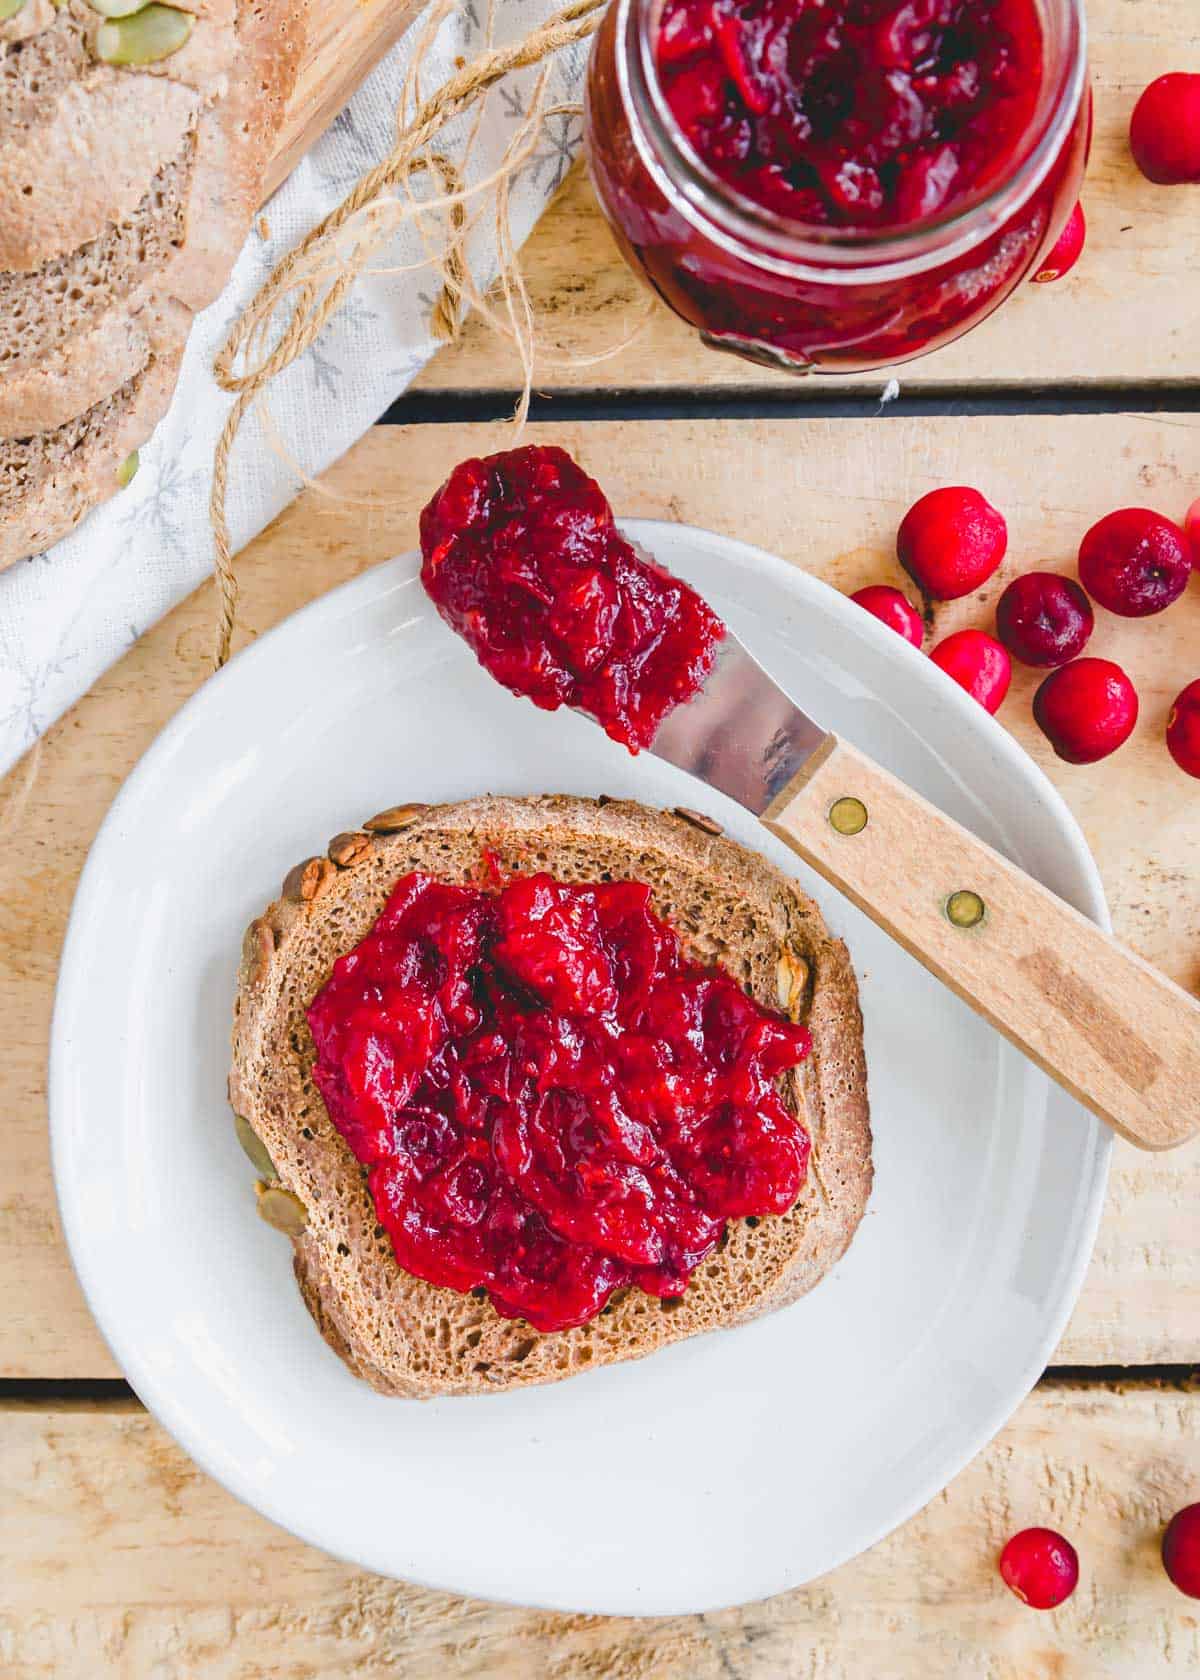 Cranberry ginger jam spread on a piece of toast on a plate.